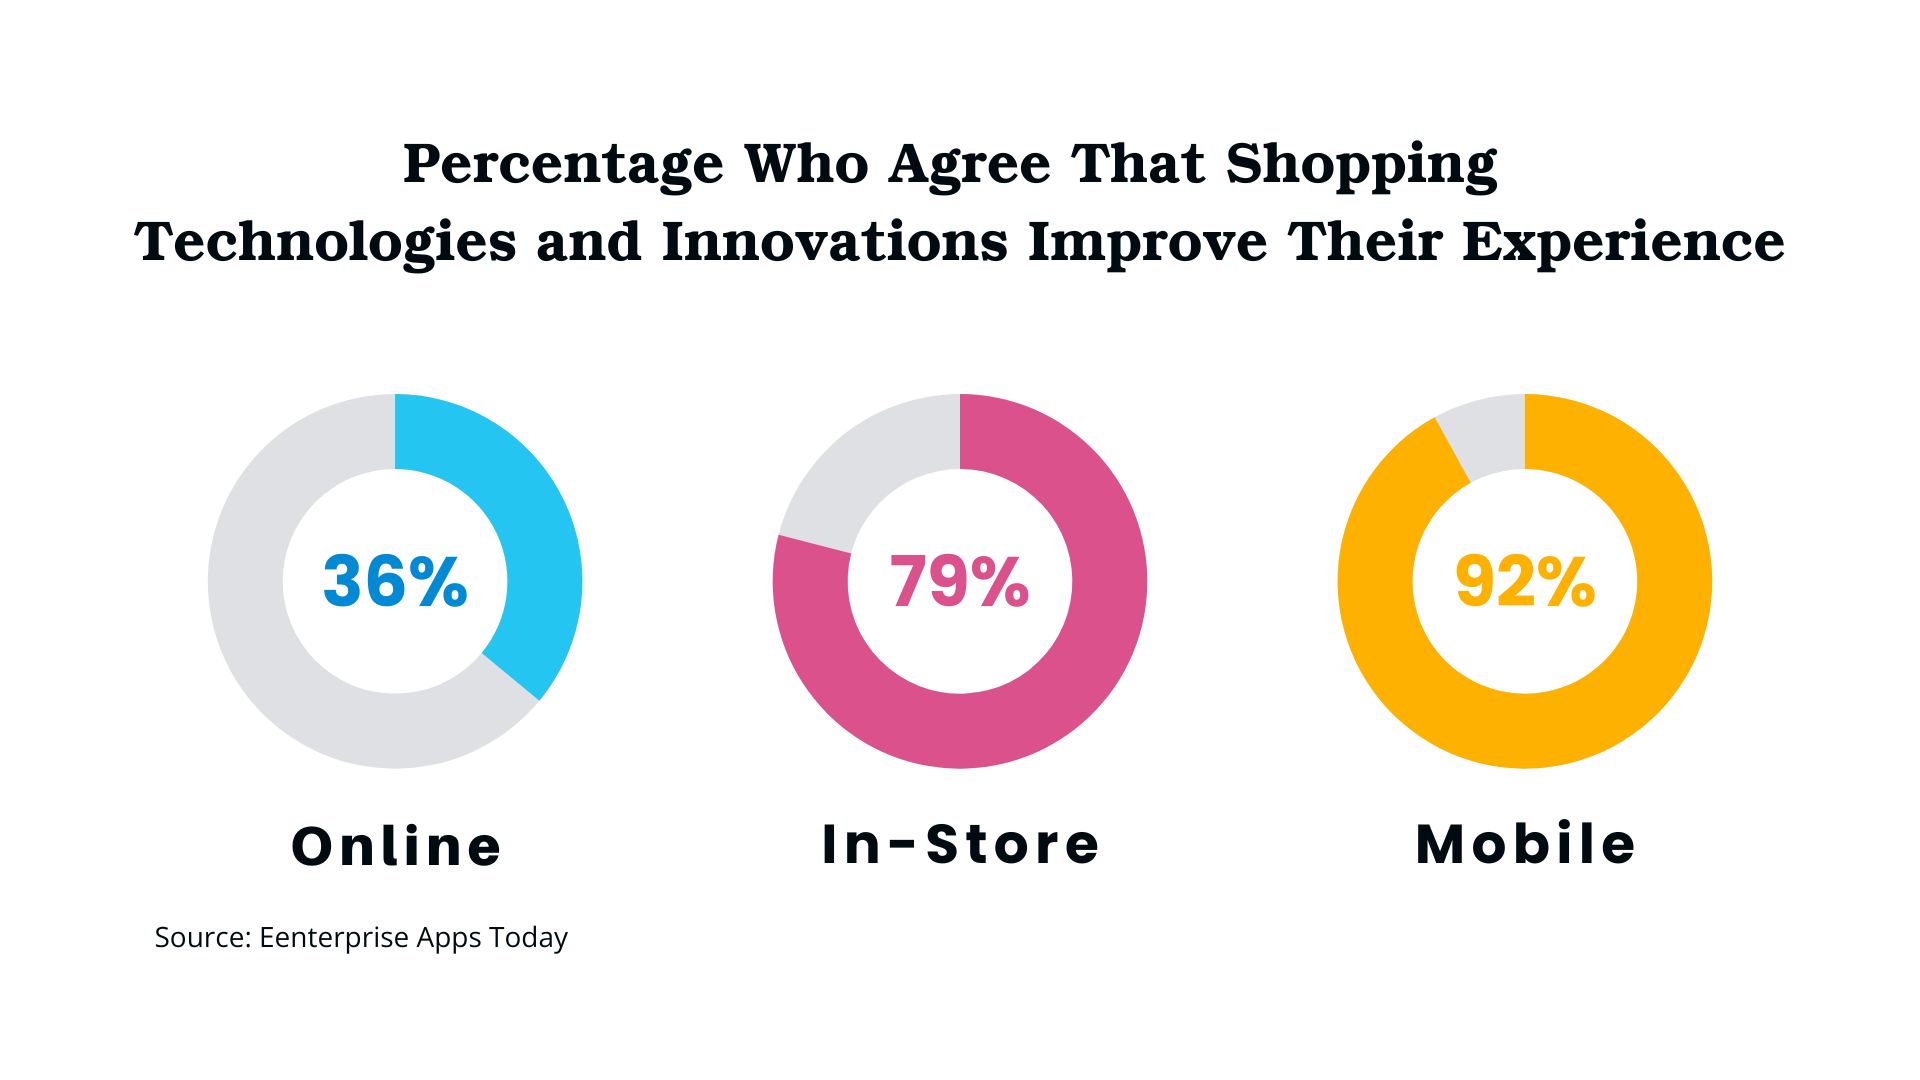 Percentage Who Agree That Shopping Technologies and Innovations Improve Their Experience